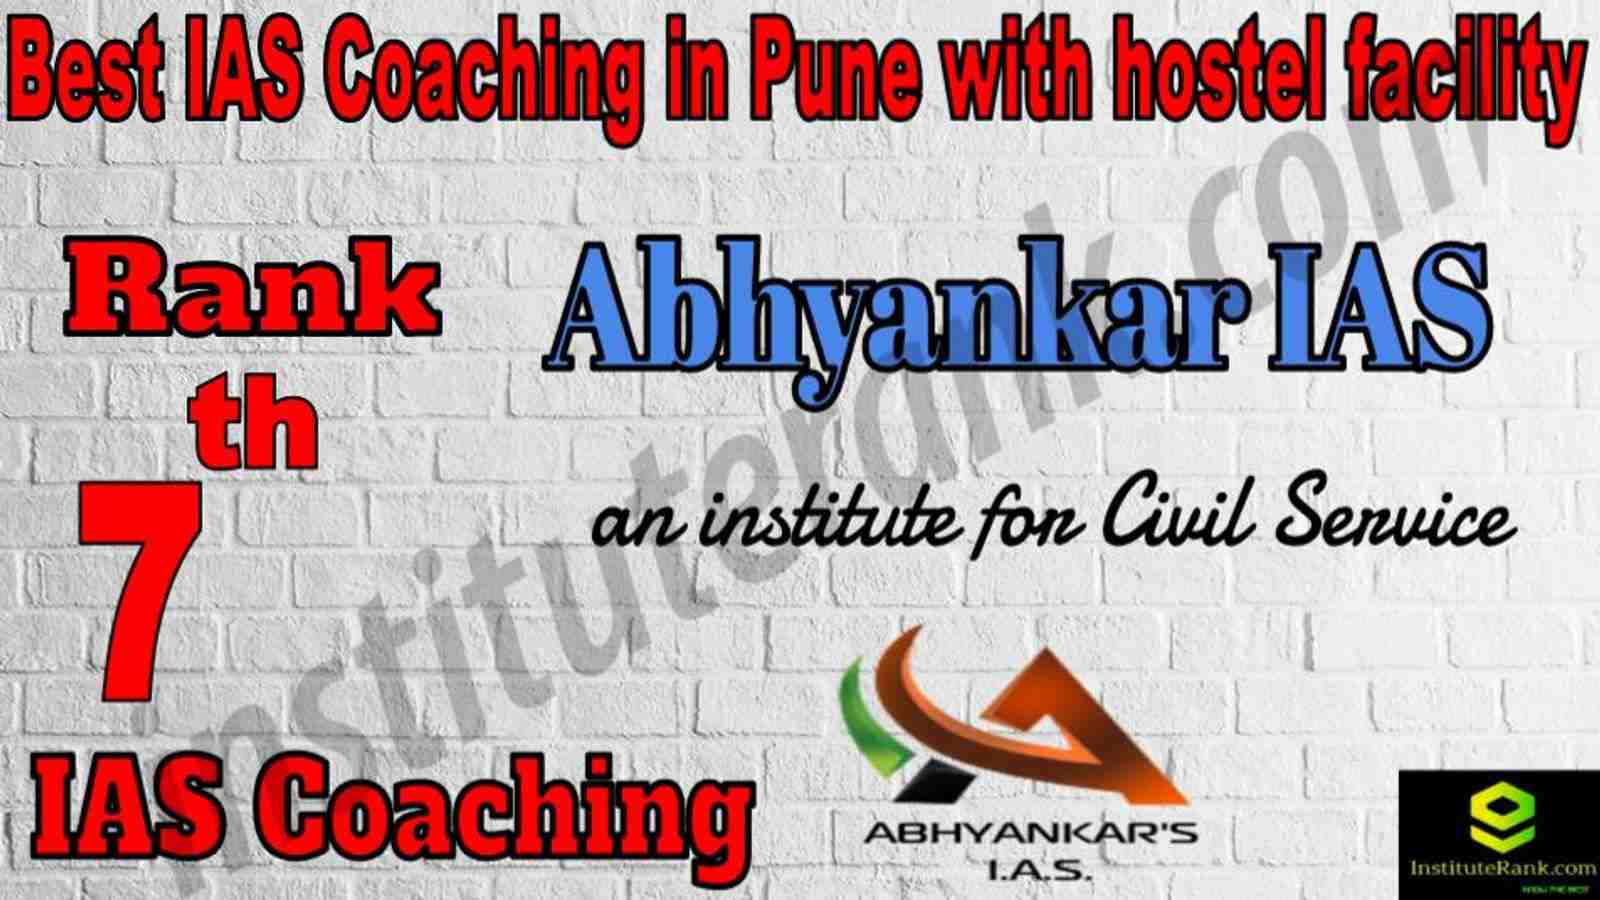 7th Best IAS Coaching in Pune with hostel facility